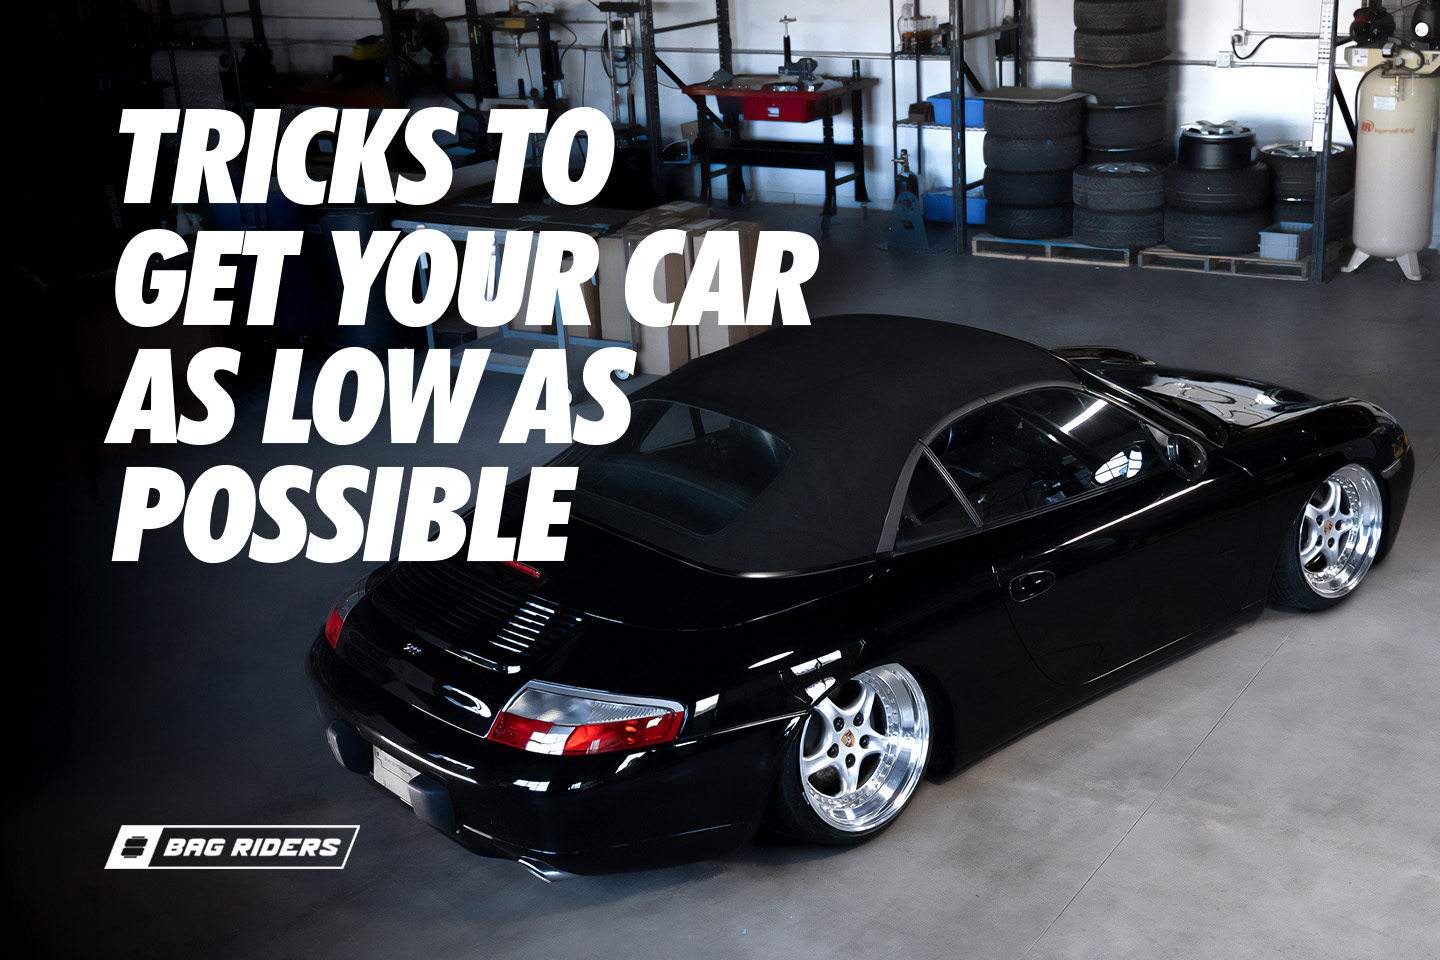 Tricks to Get Your Car as Low as Possible